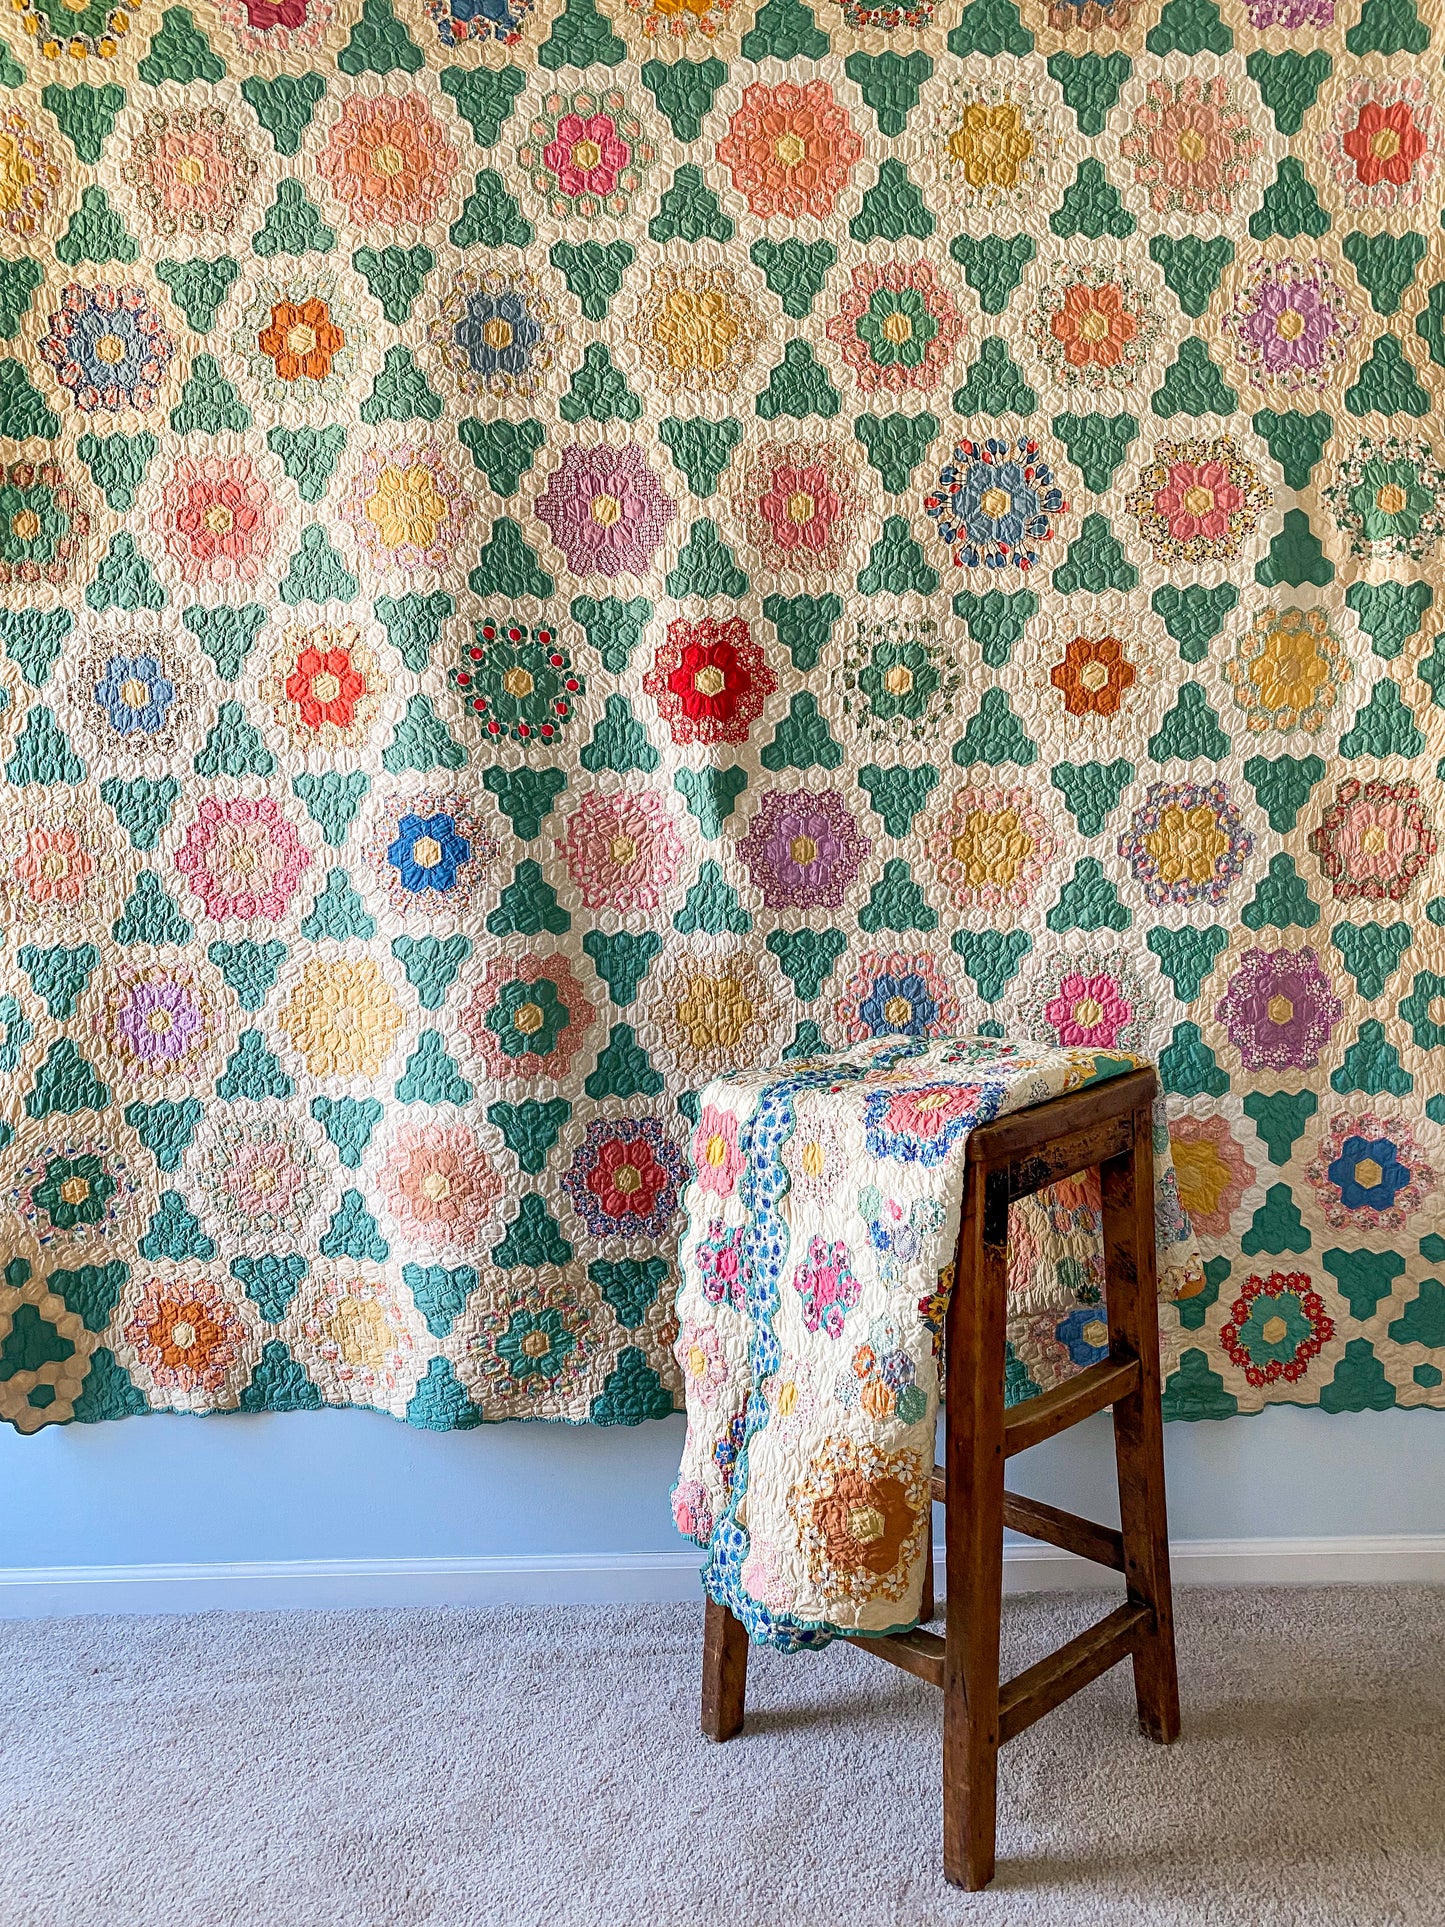 Vintage Green and Tan Grandmother's Flower Garden Quilt with Matching Runner, c1930s